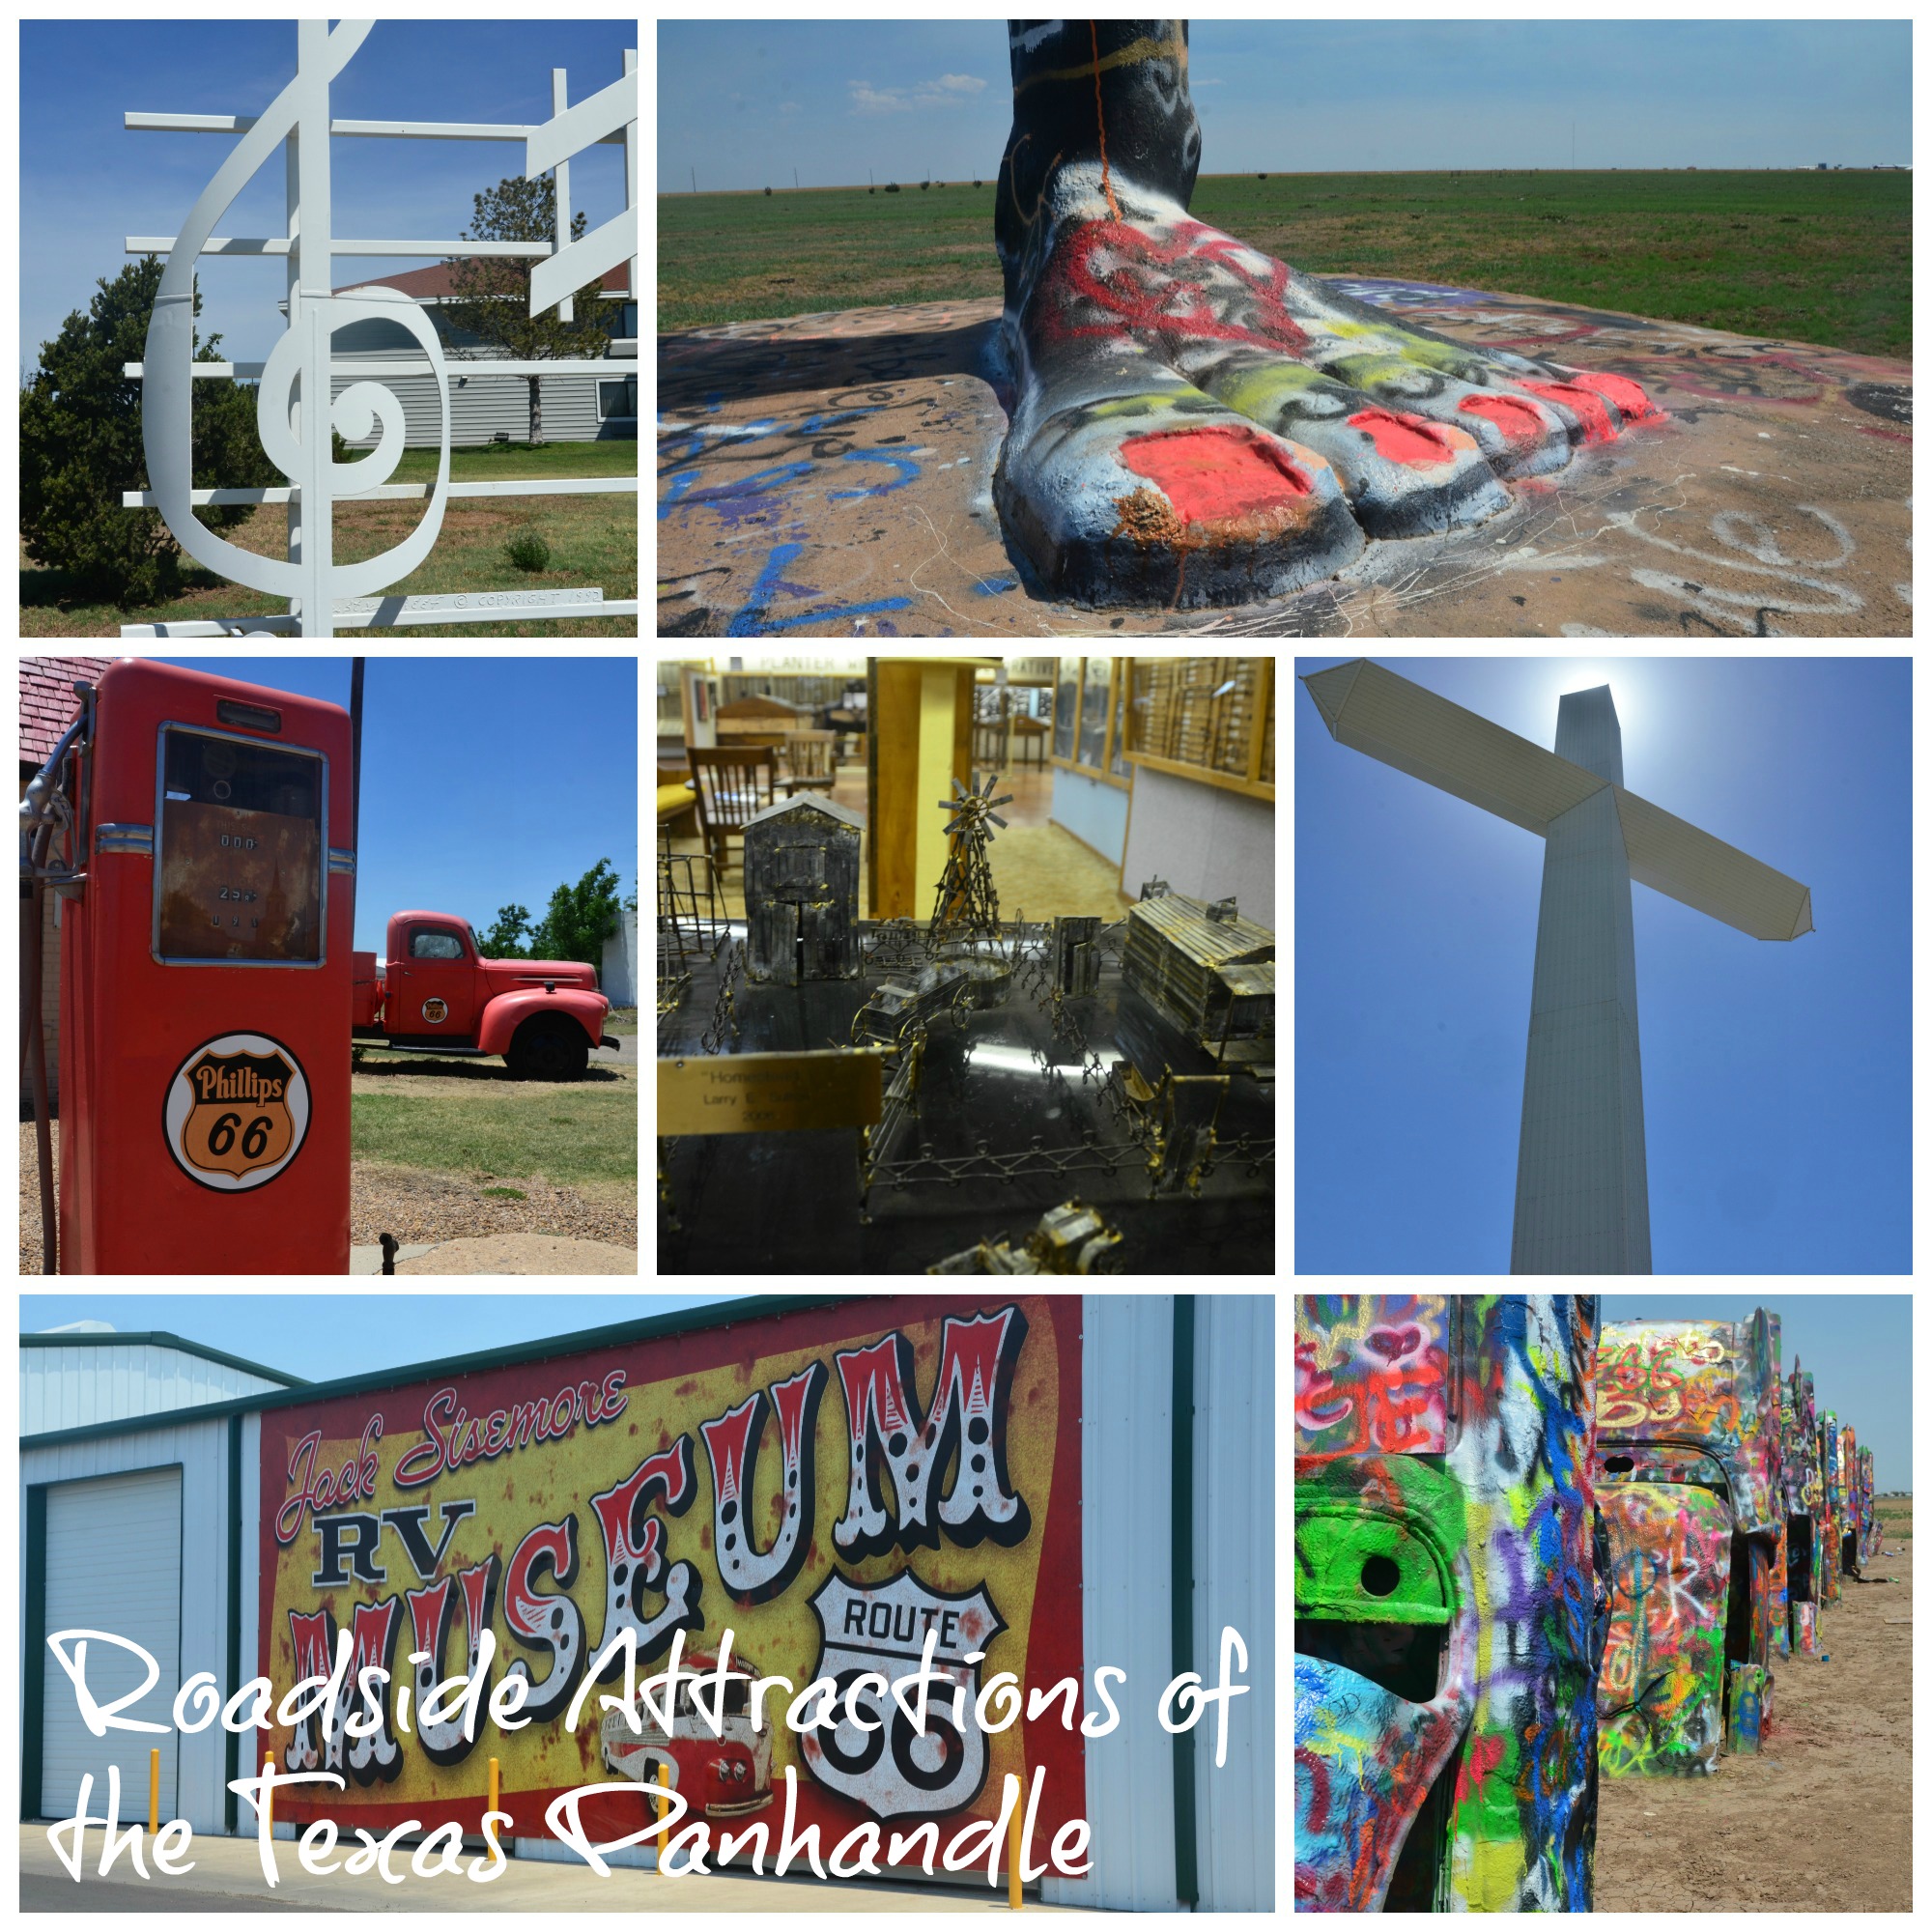 Weird and Wacky Roadside Attractions in the Texas Panhandle